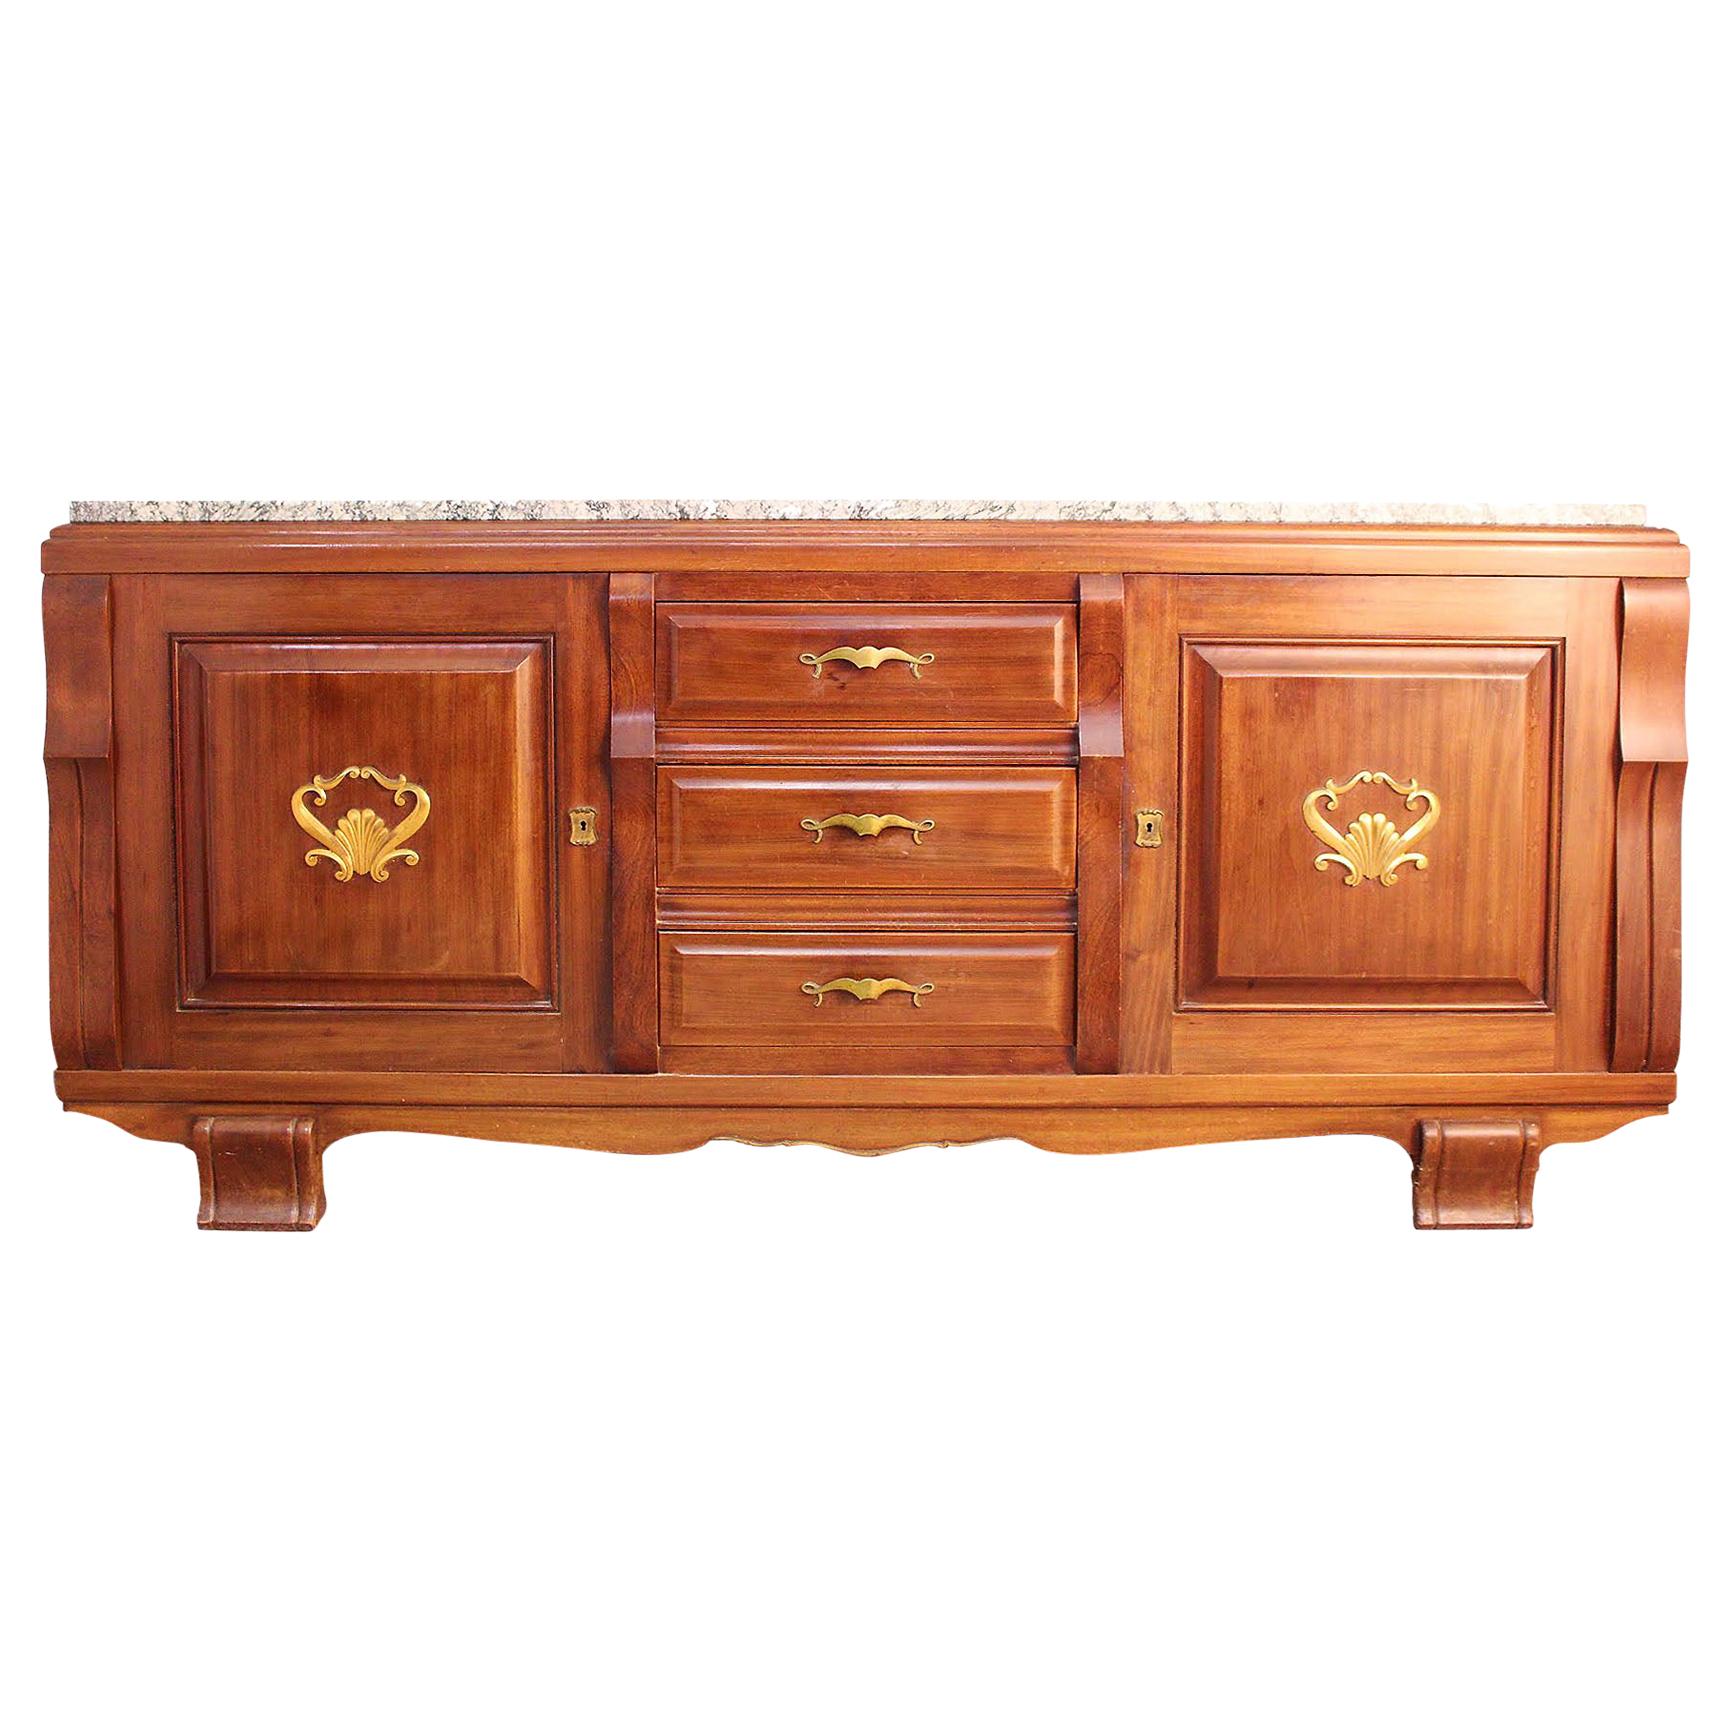 Midcentury Credenza Sideboard French Marble-Top Buffet, circa 1950-1960